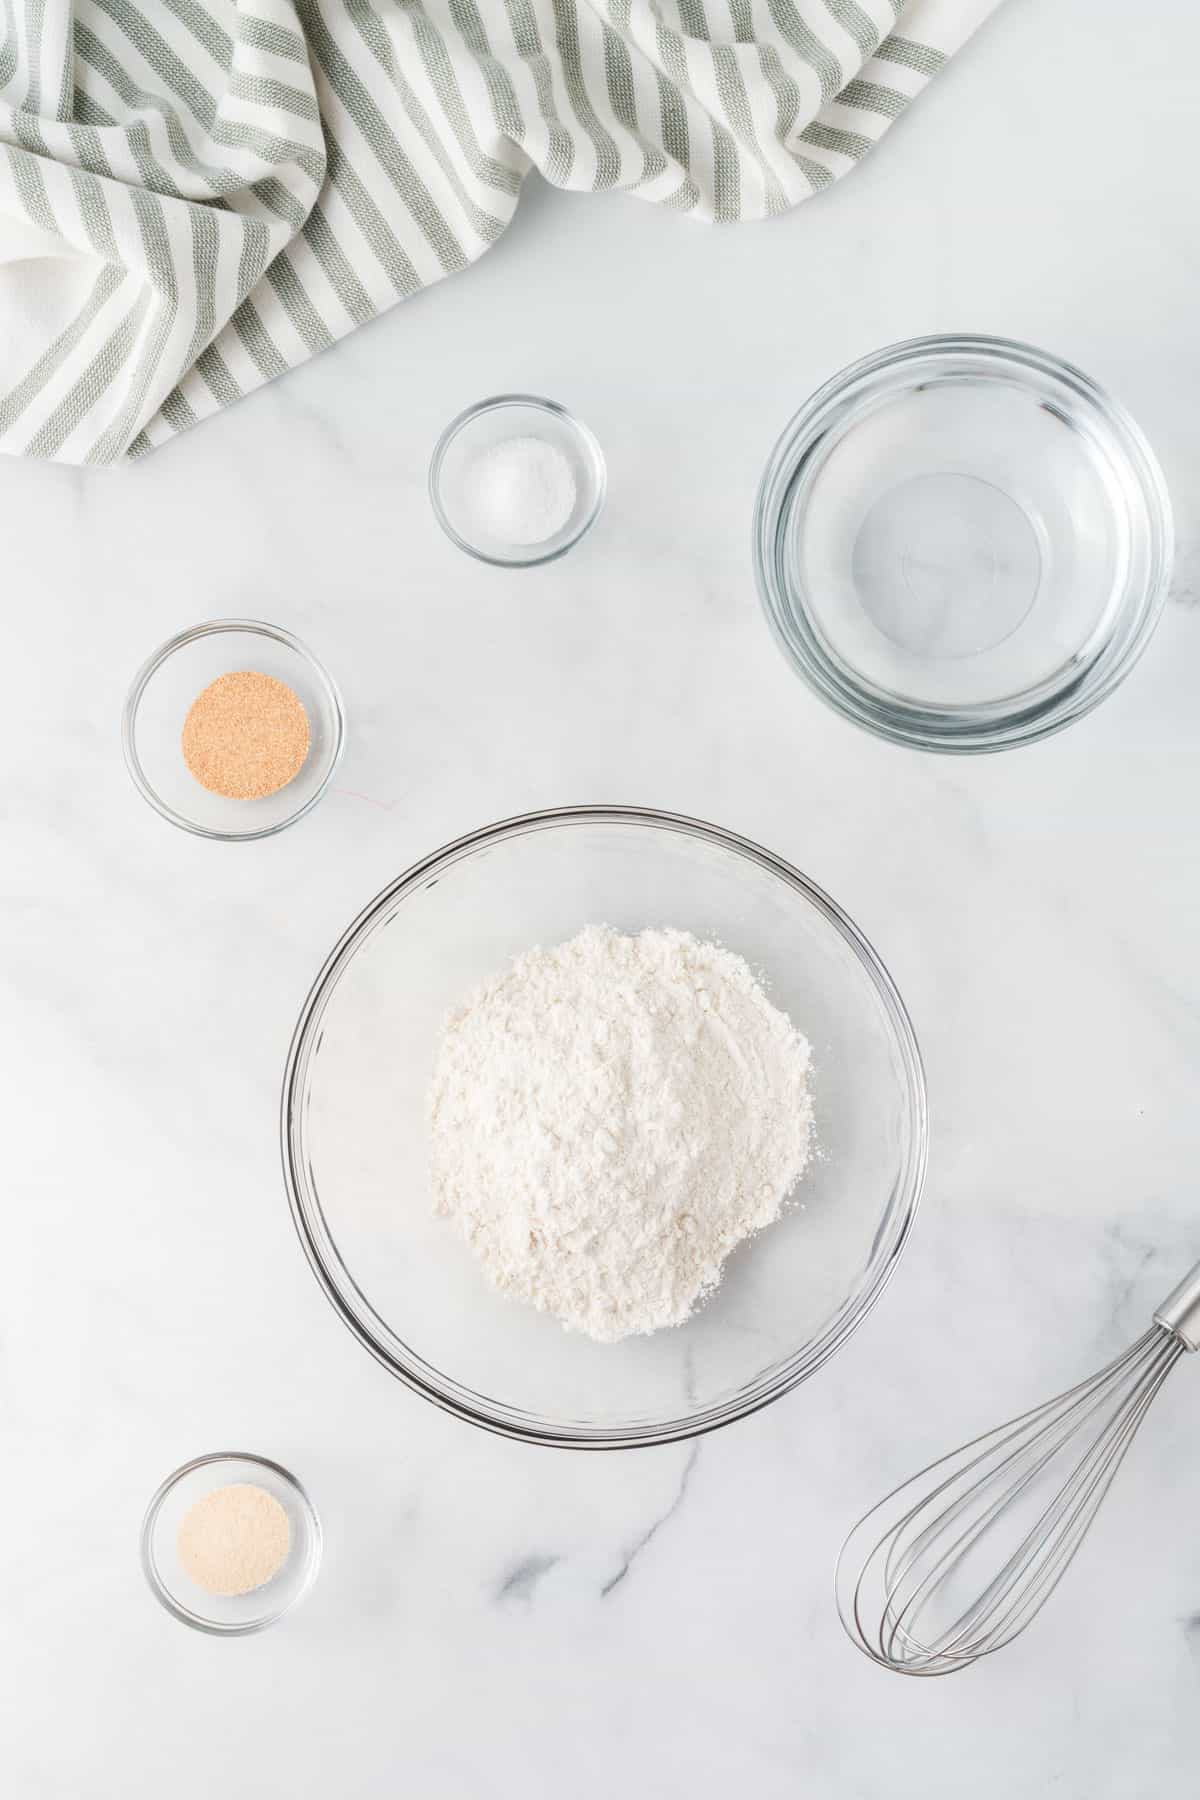 ingredients to make the batter